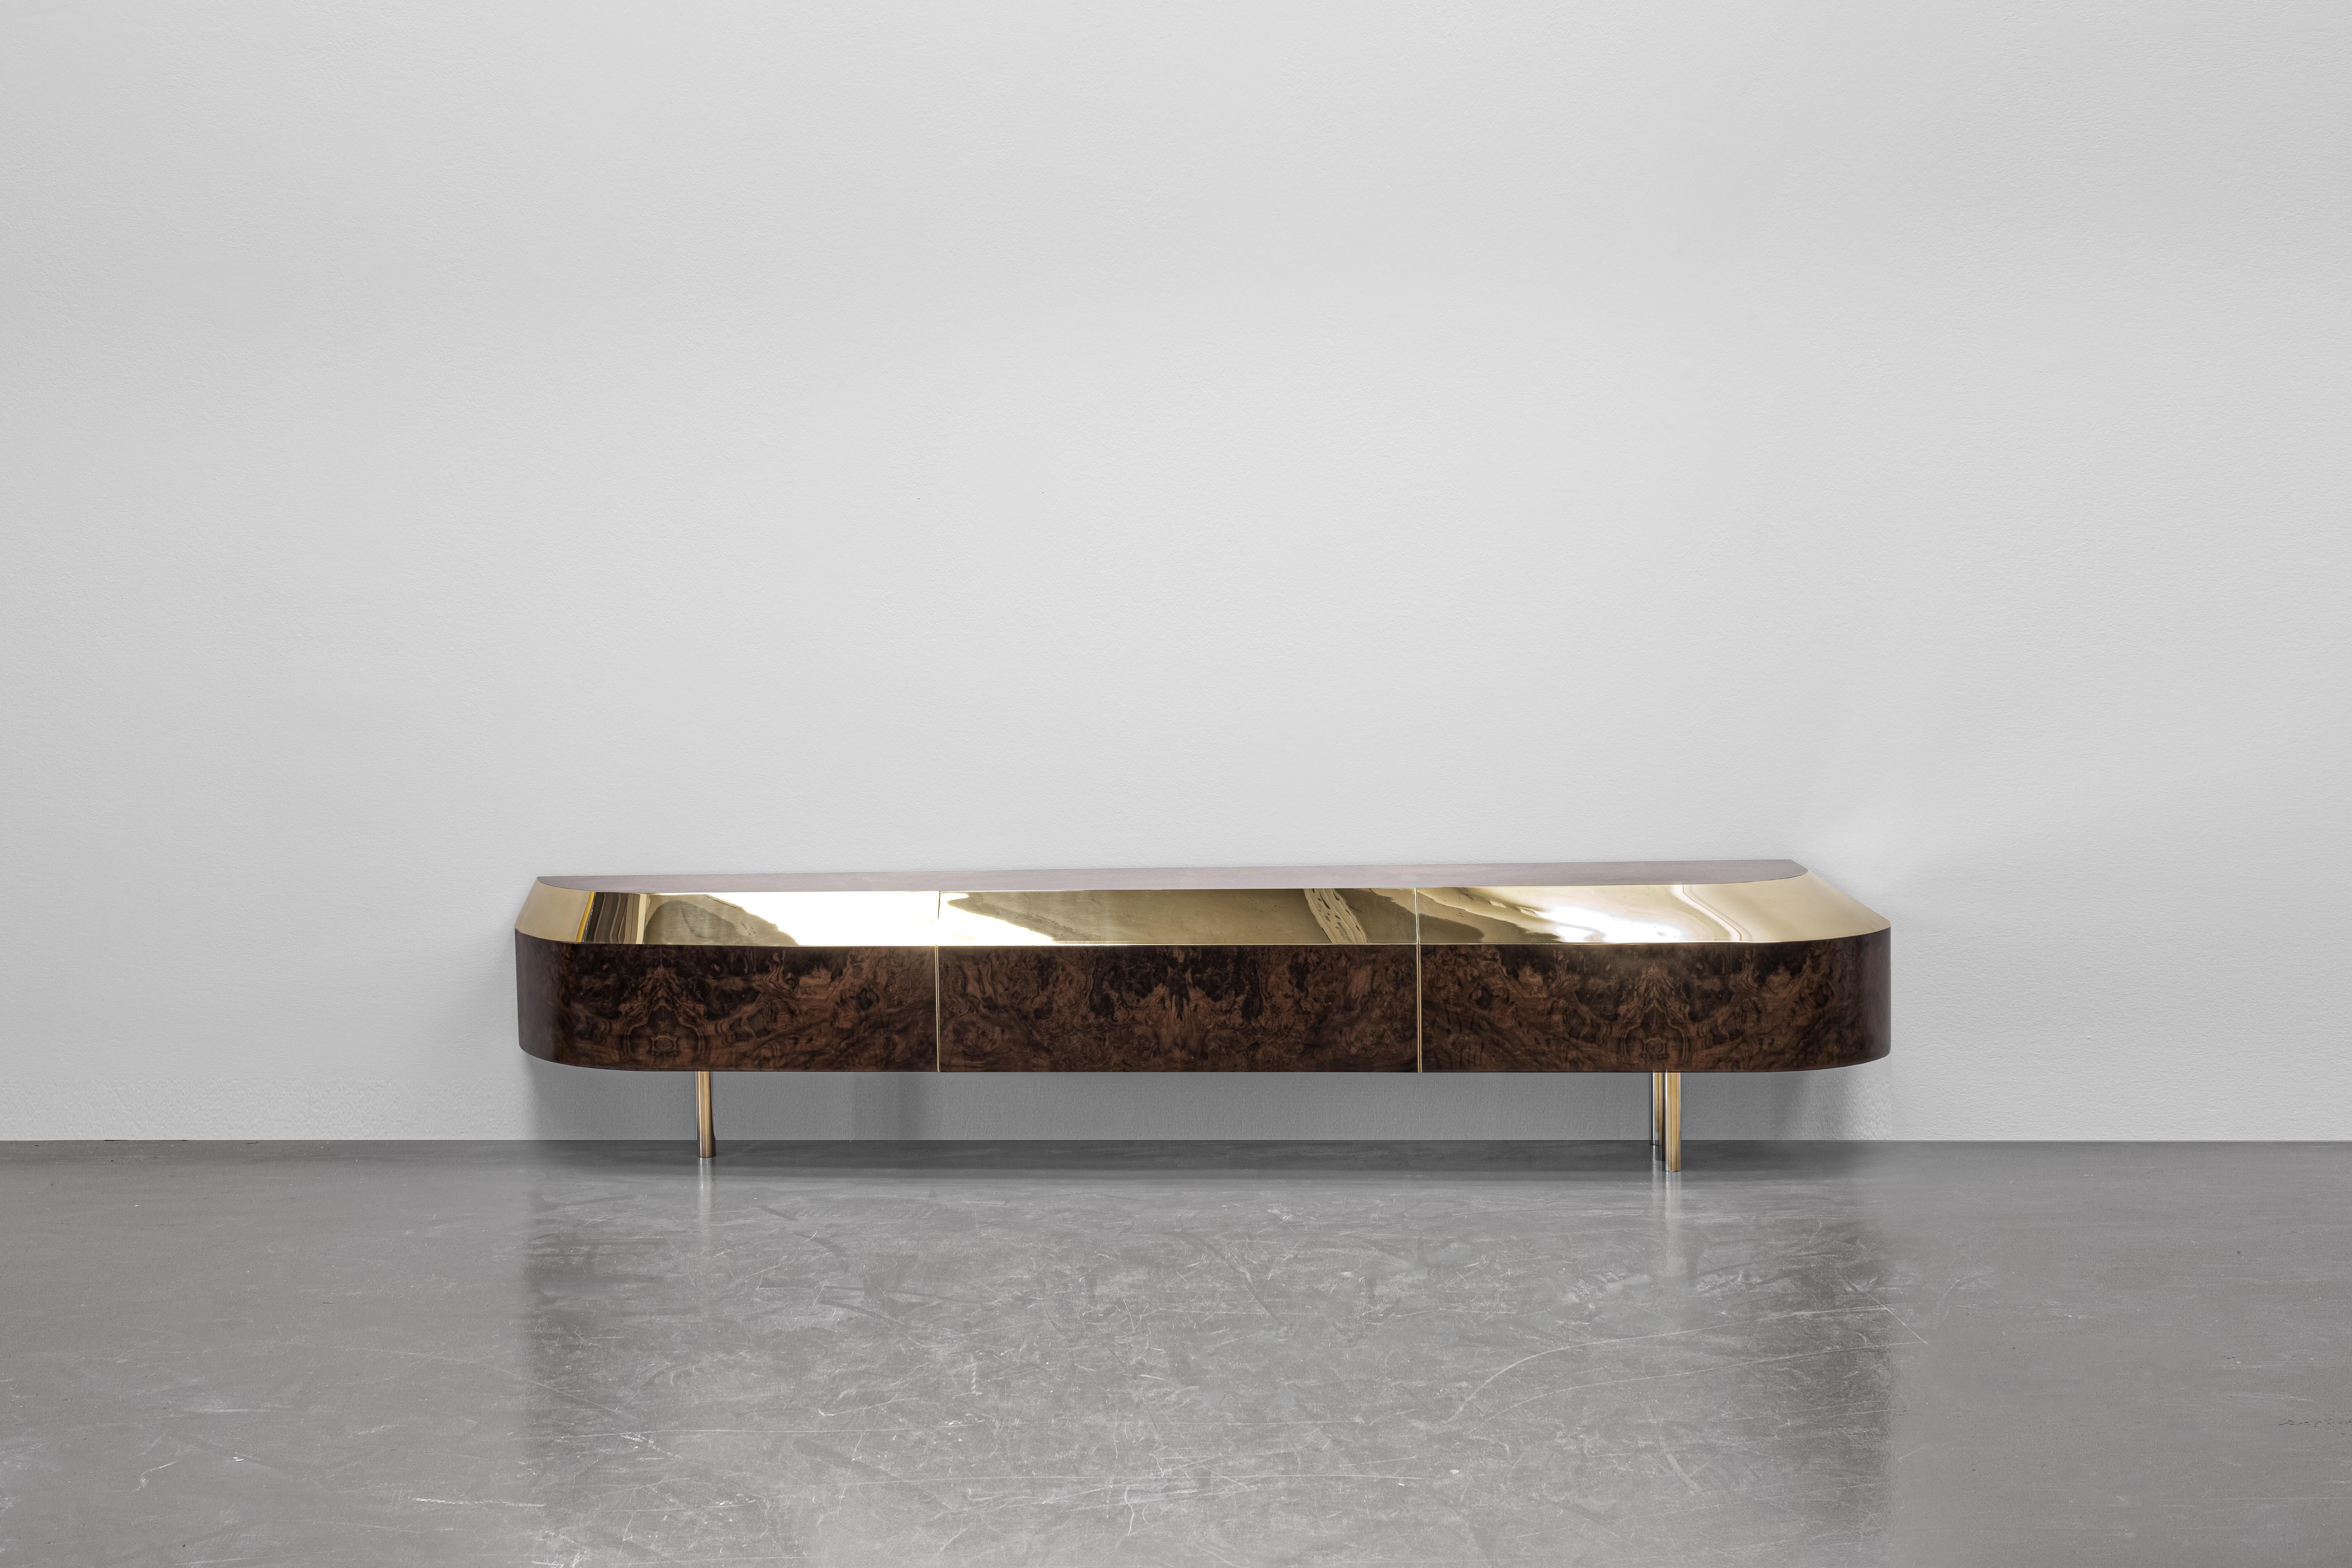 Distortion series object 5 polished brass console by Emelianova Studio.
Distortion Series Vol 1. 
Limited Edition of 20. 
Signed and numbered.
Dimensions: 210 × 45 × 40 cm.
Materials: polished brass, briar wood.
Handmade.




Distortion